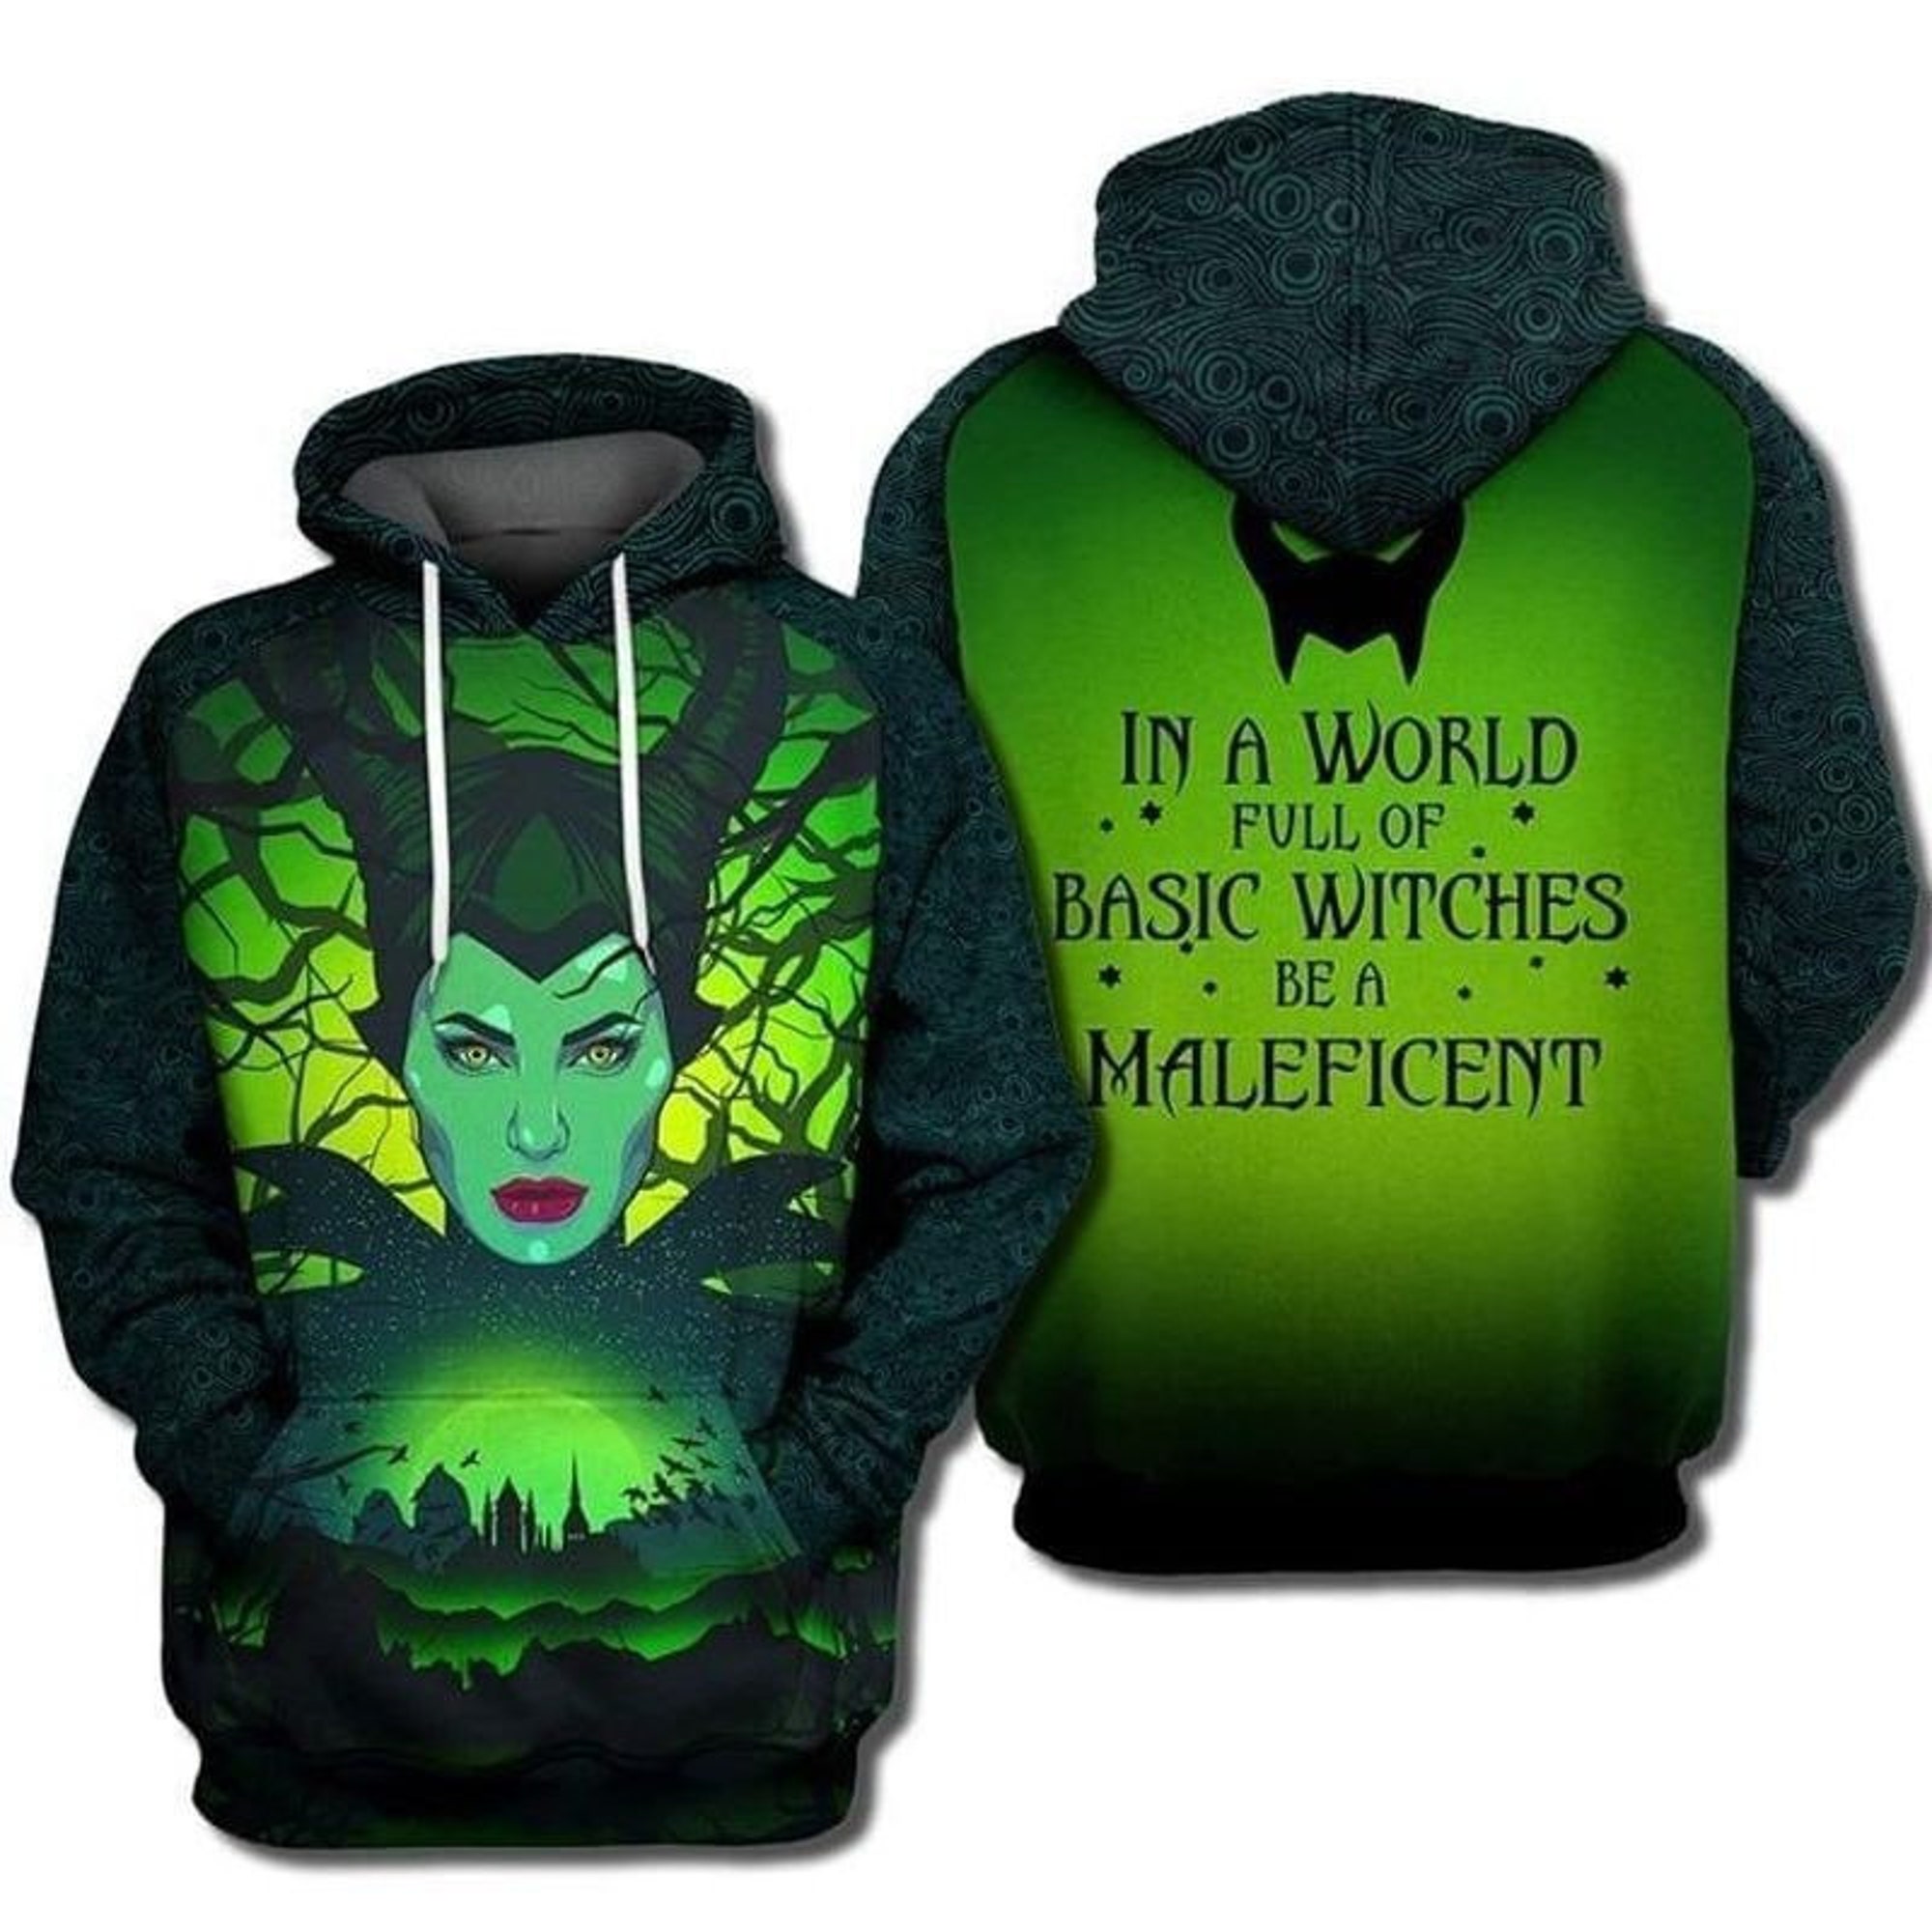 Discover For Maleficent Lovers In World Full Of Basic Witches Be A Maleficent 3d shirt